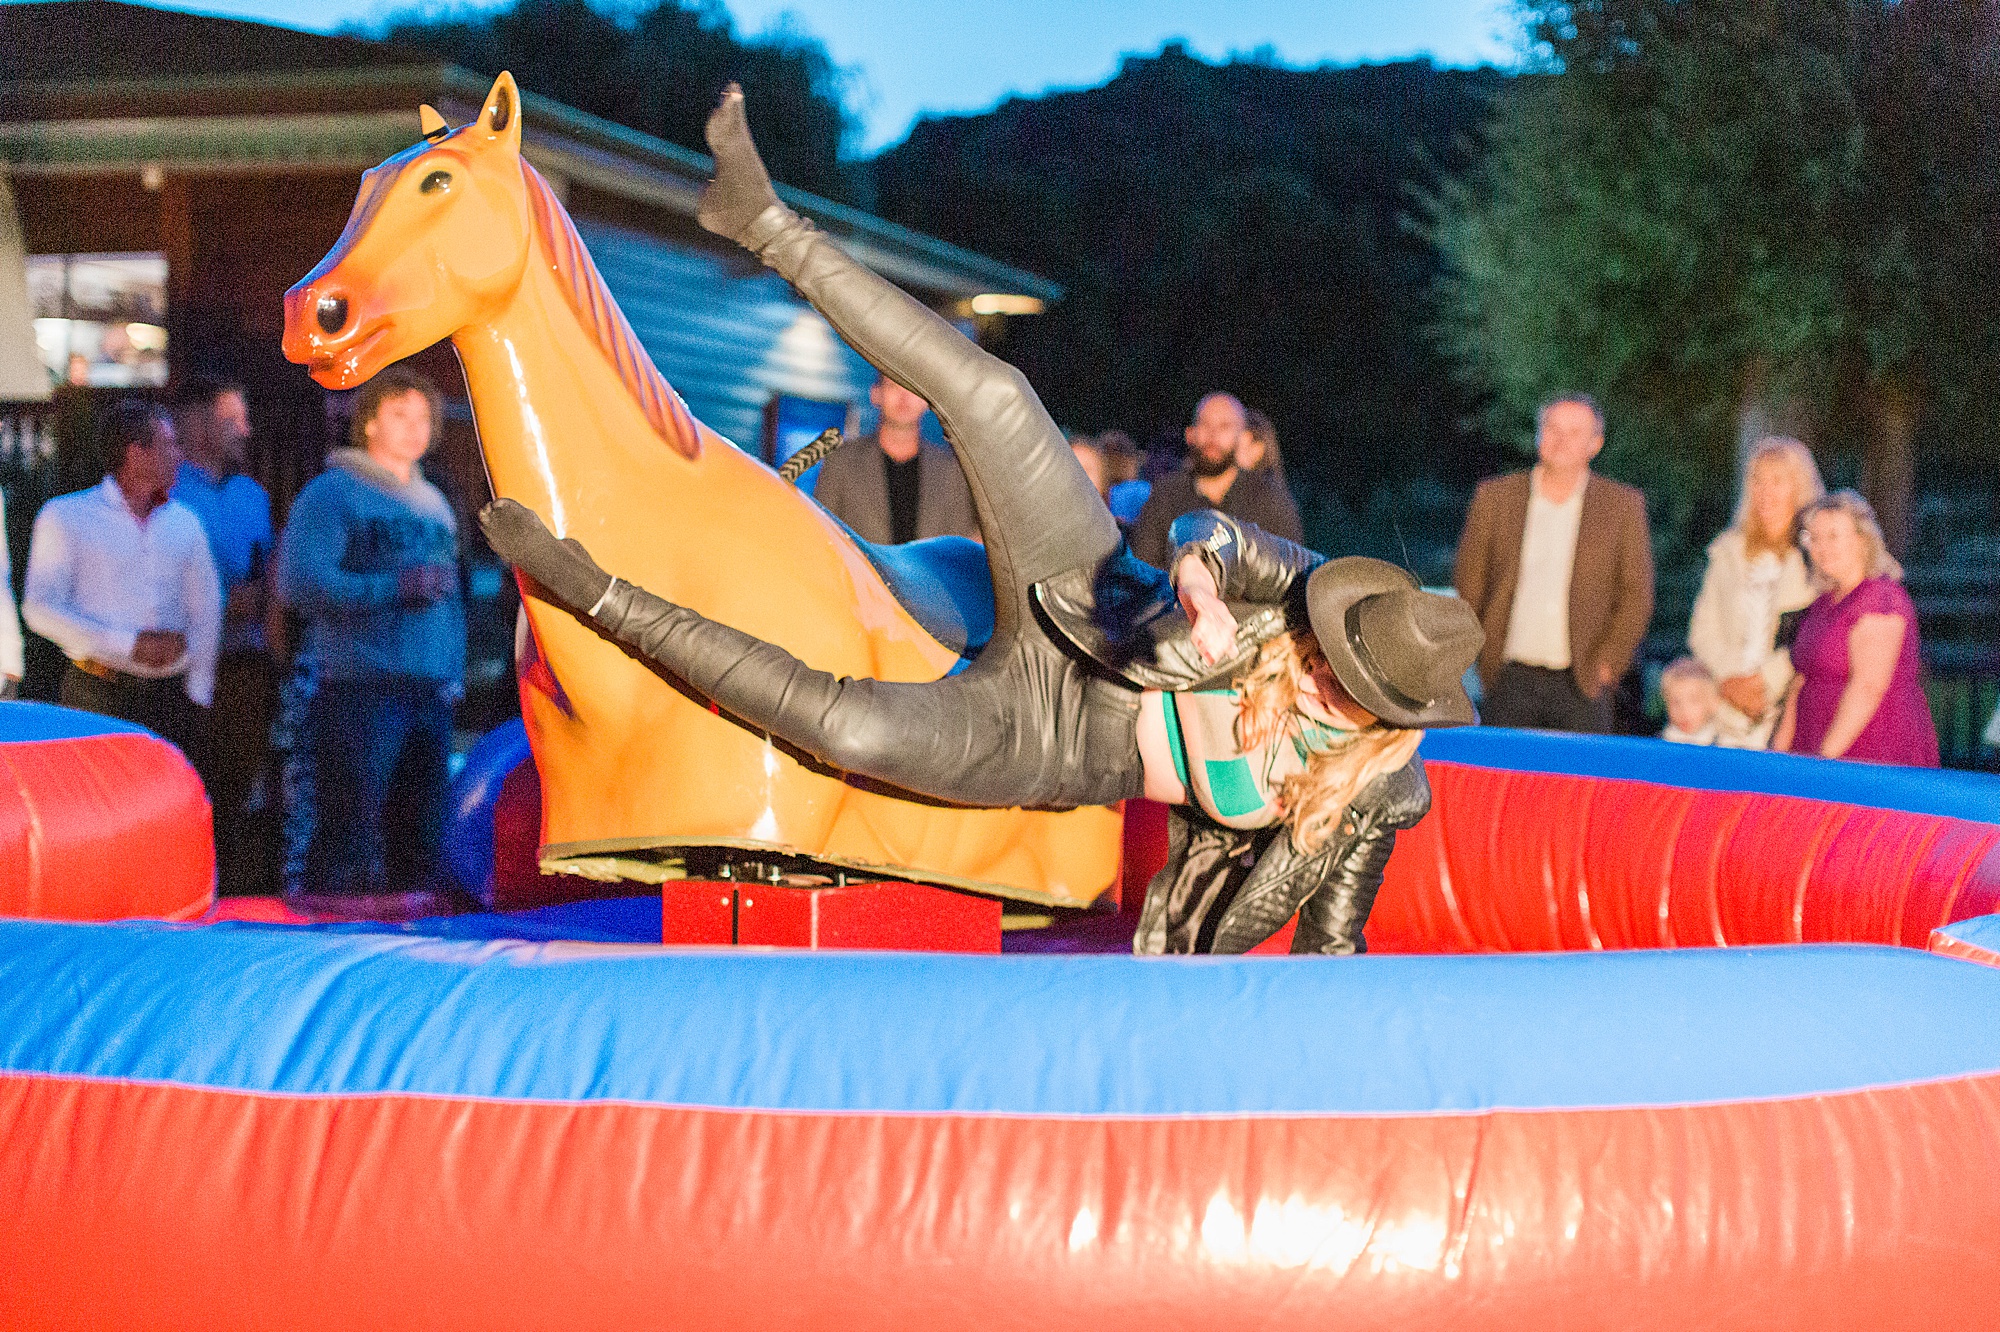 photo of a wedding guest riding a mechanical rodeo pony outside at a wedding reception with guests watching. The guest is almost horizontal to the horse as she falls off 